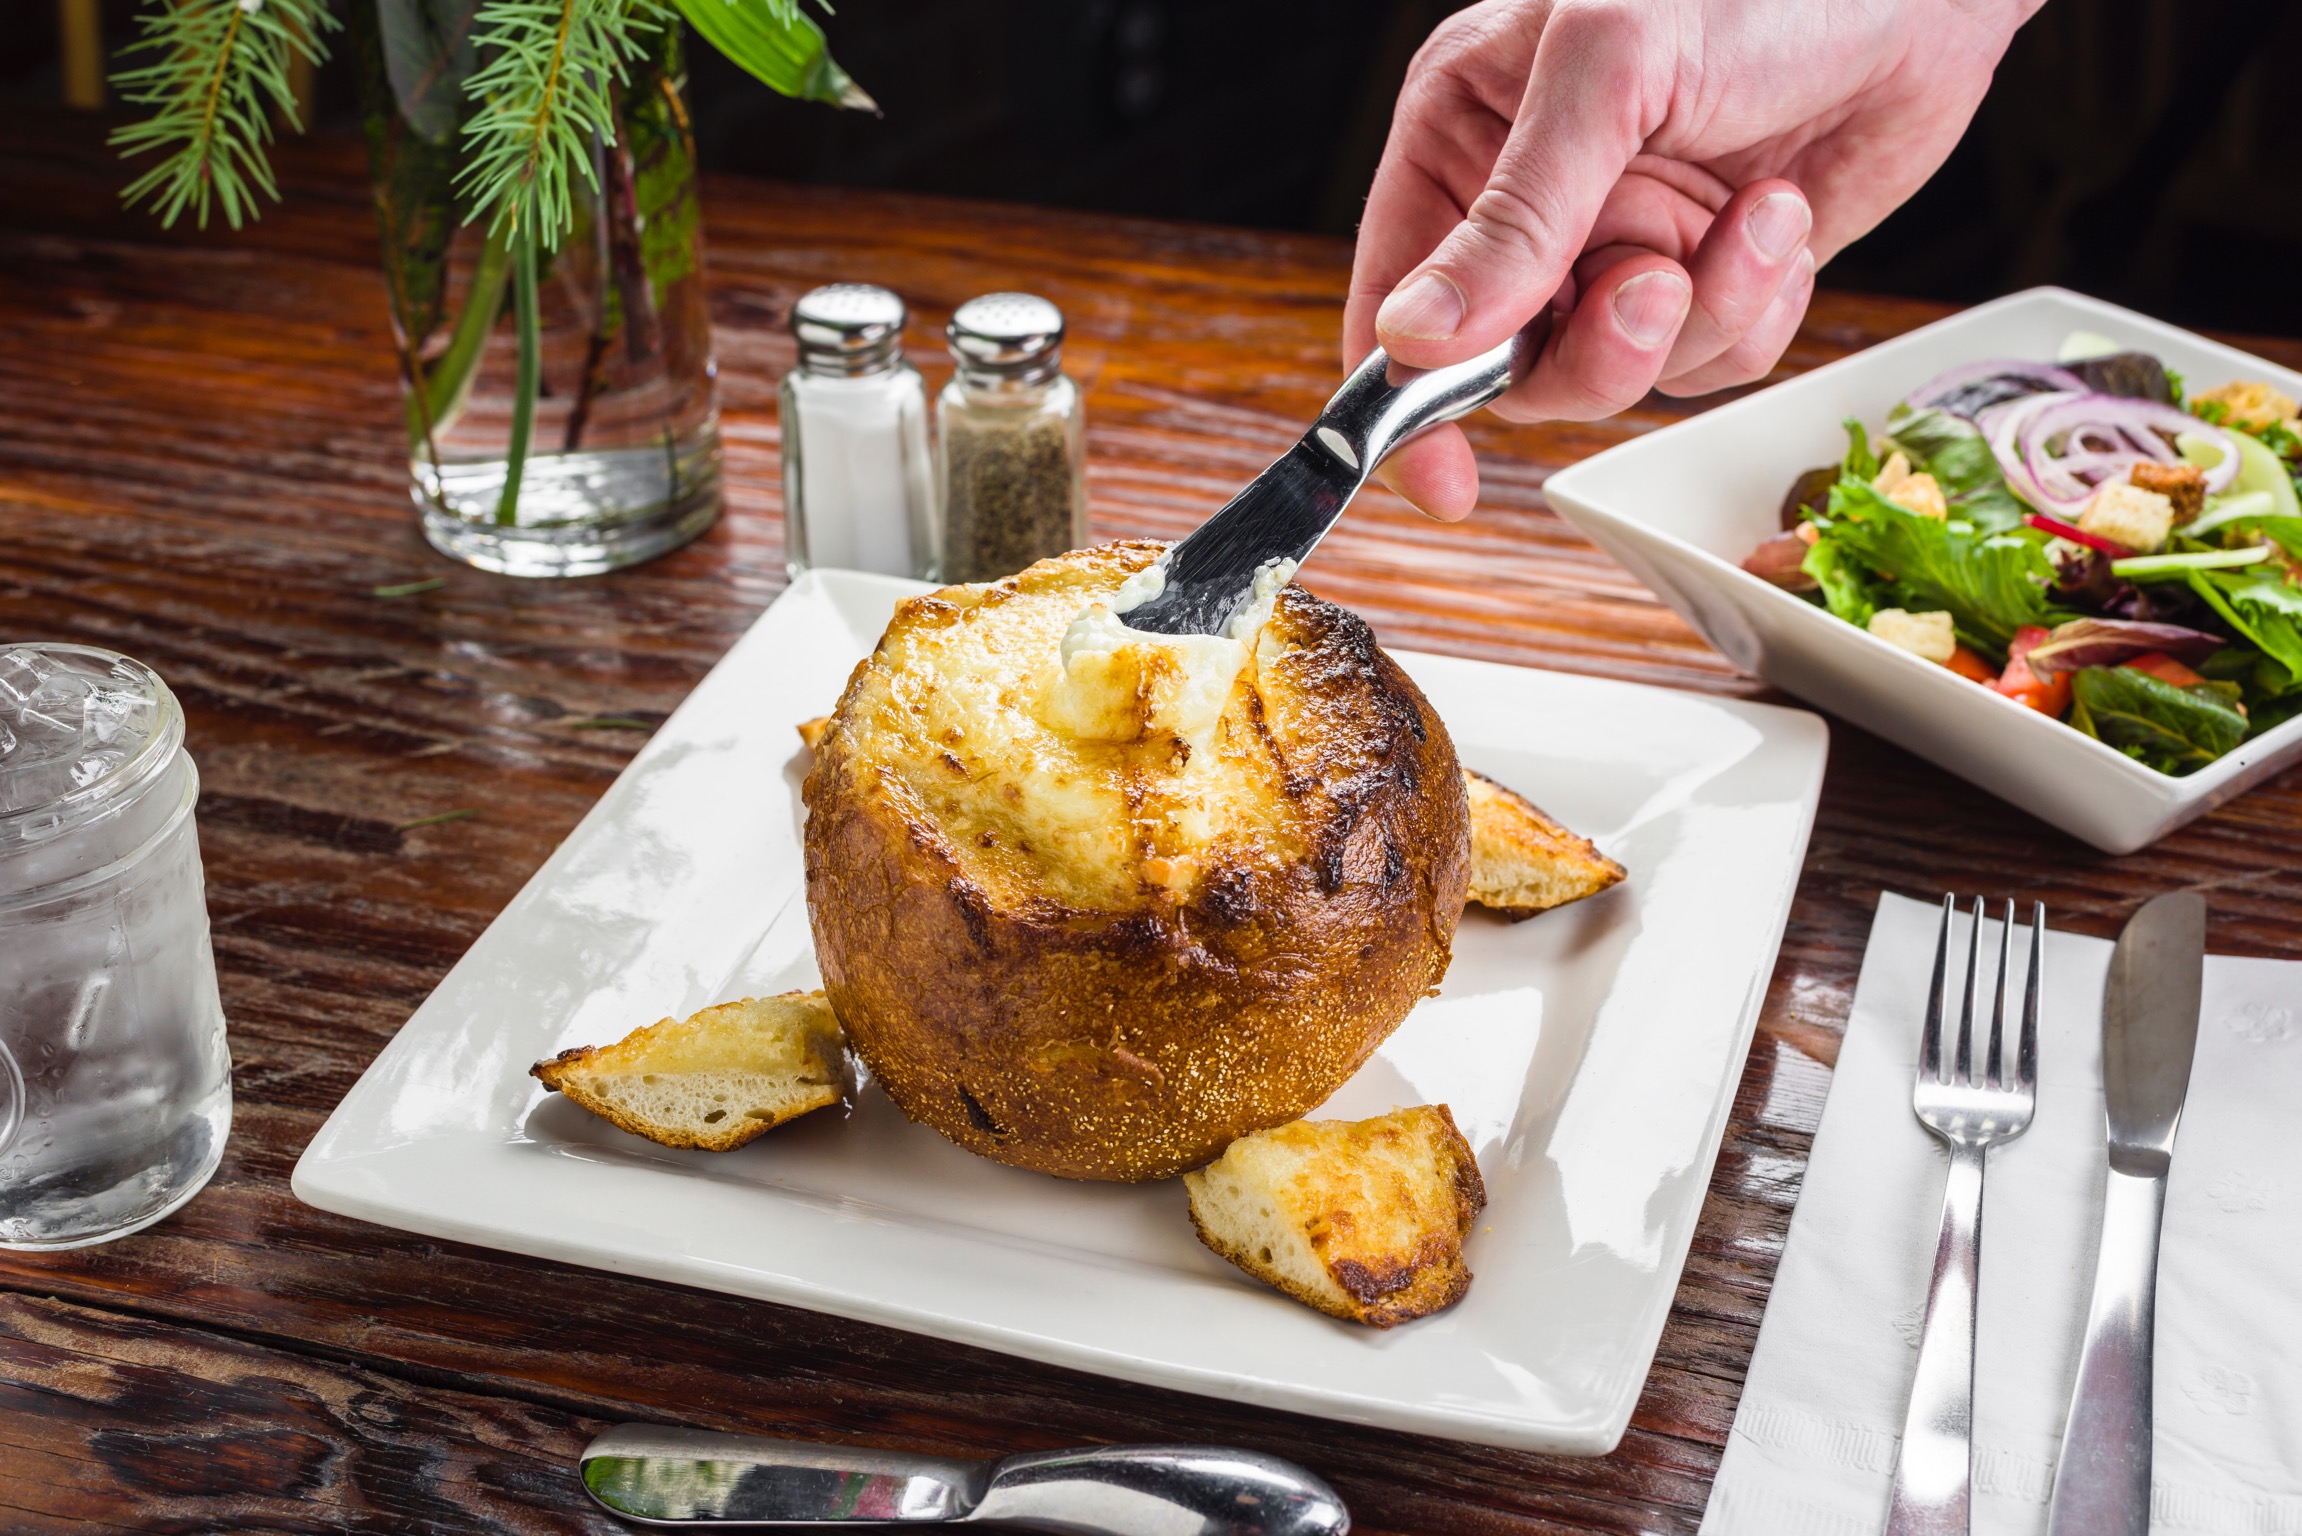 Bread bowl of cheese Brie